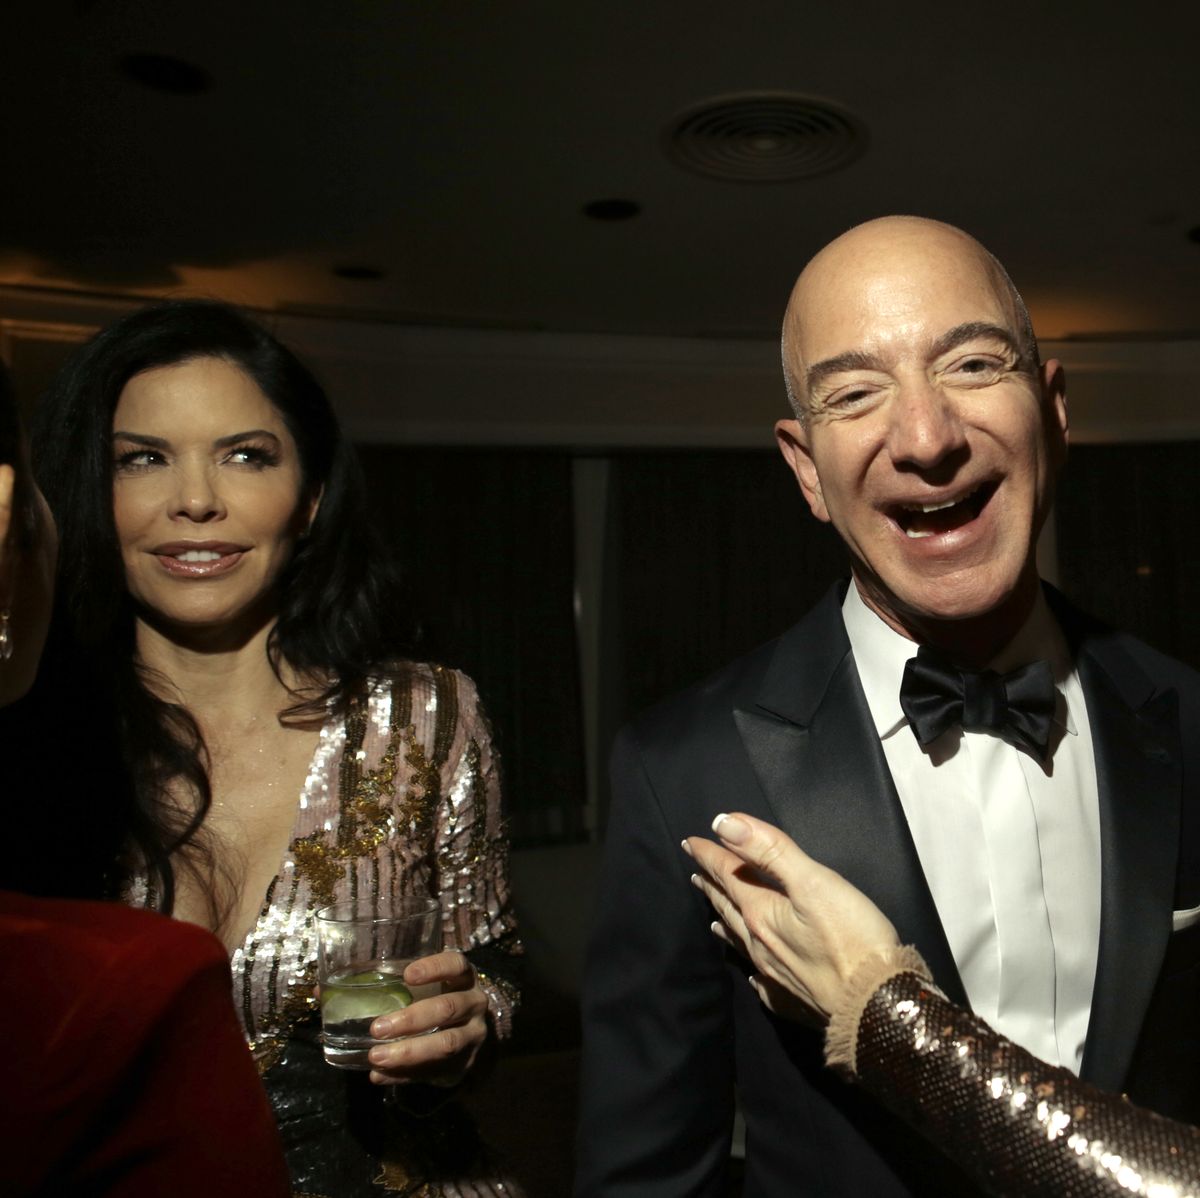 Jeff Bezos of Amazon at a Golden Globes afterparty in Los Angeles.